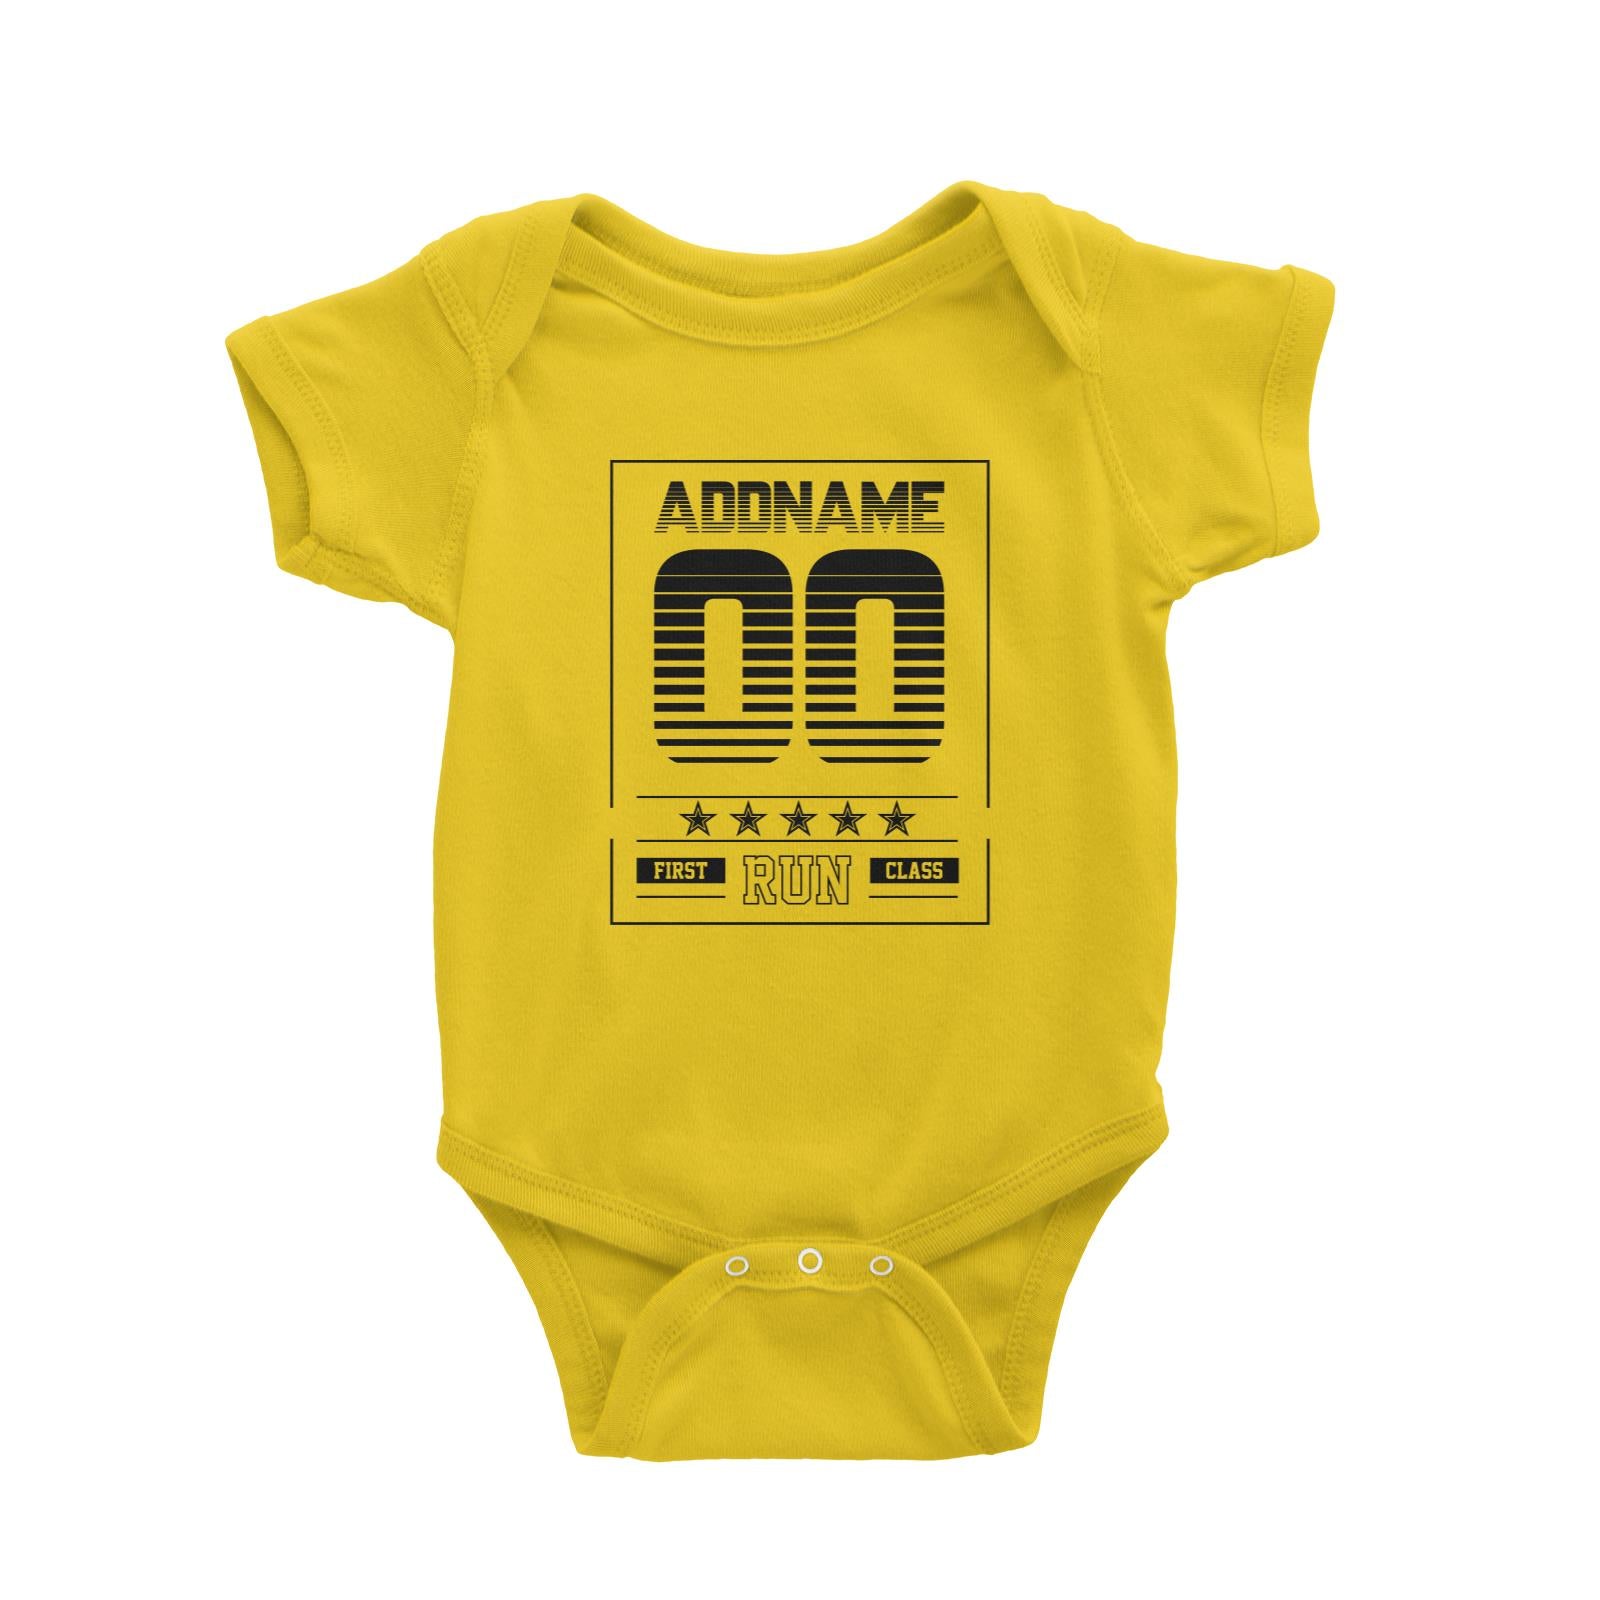 First Run Class Personalizable with Name and Number Baby Romper